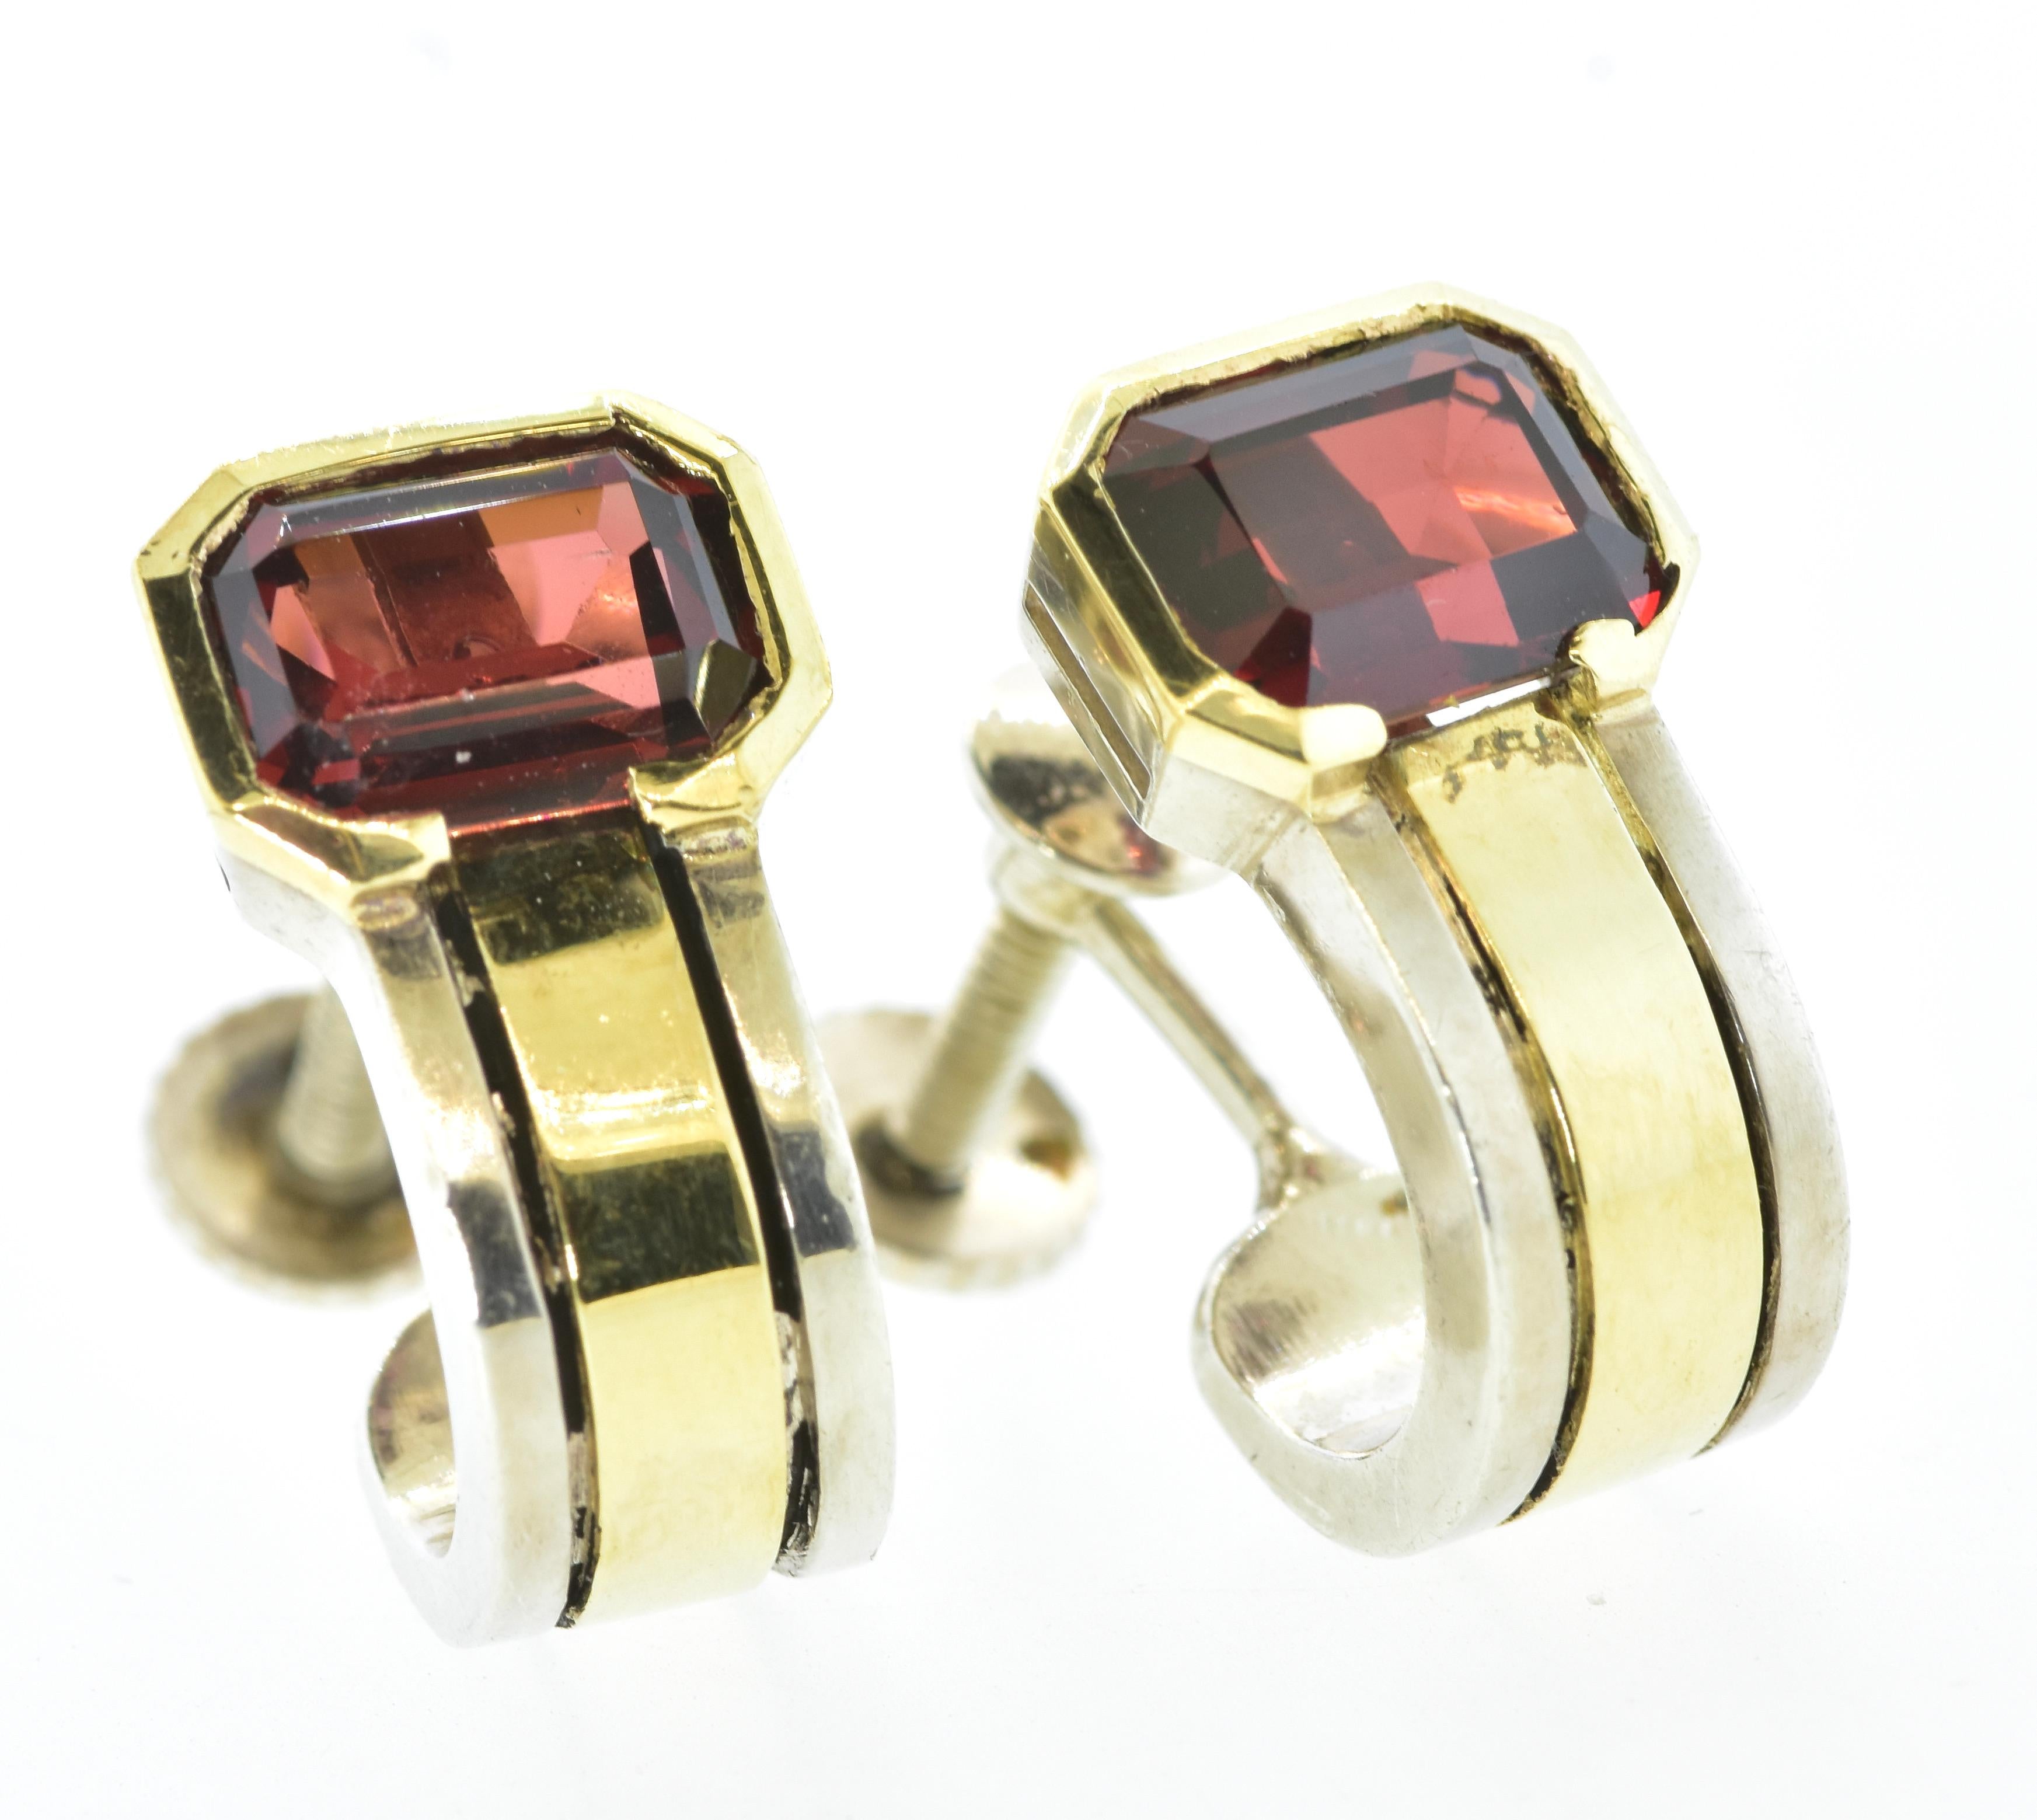 Cartier earrings in 18K yellow gold and sterling silver with natural red/orange emerald cut garnets each slightly larger than 1 ct., with a total weight of 2.15 cts.  These half hoop earrings are circa 1979 and have the original screw backs. They